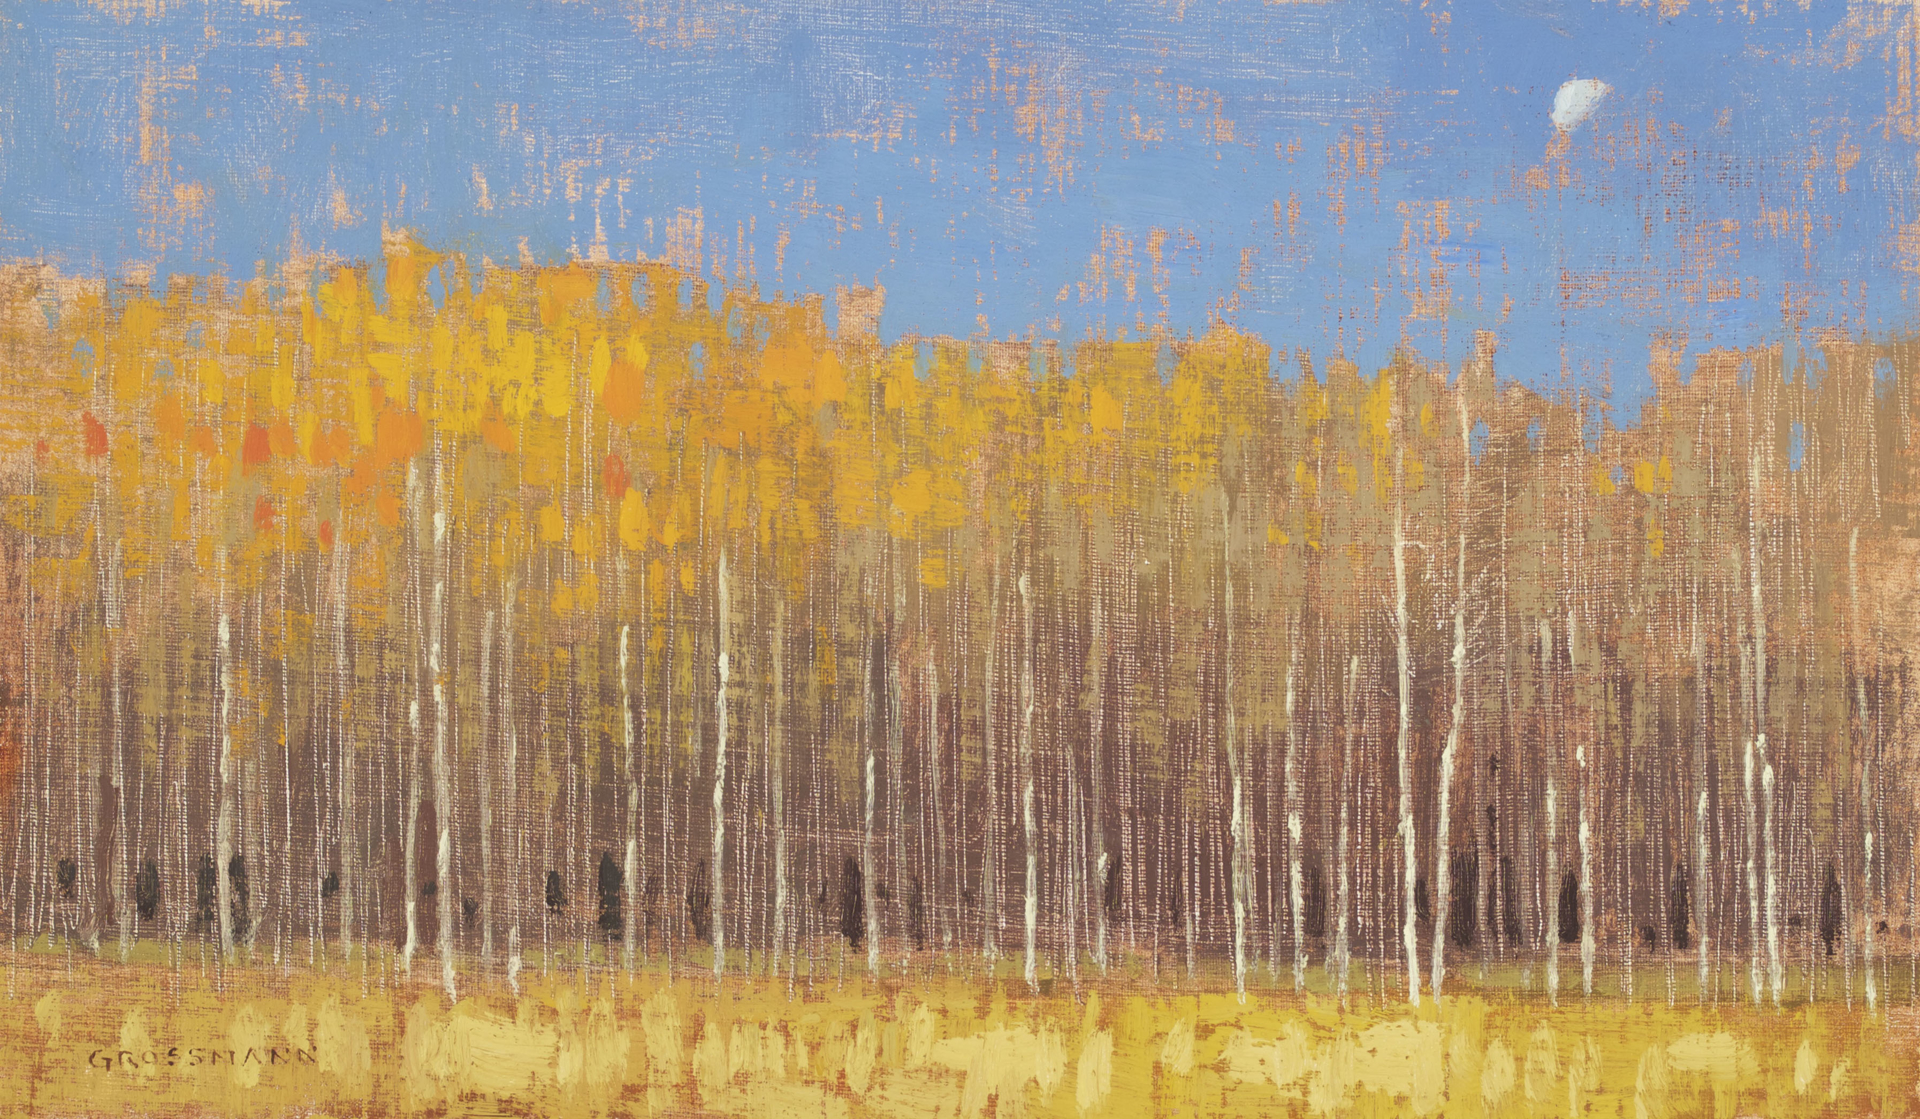 Moon and Lingering Leaves by David Grossmann